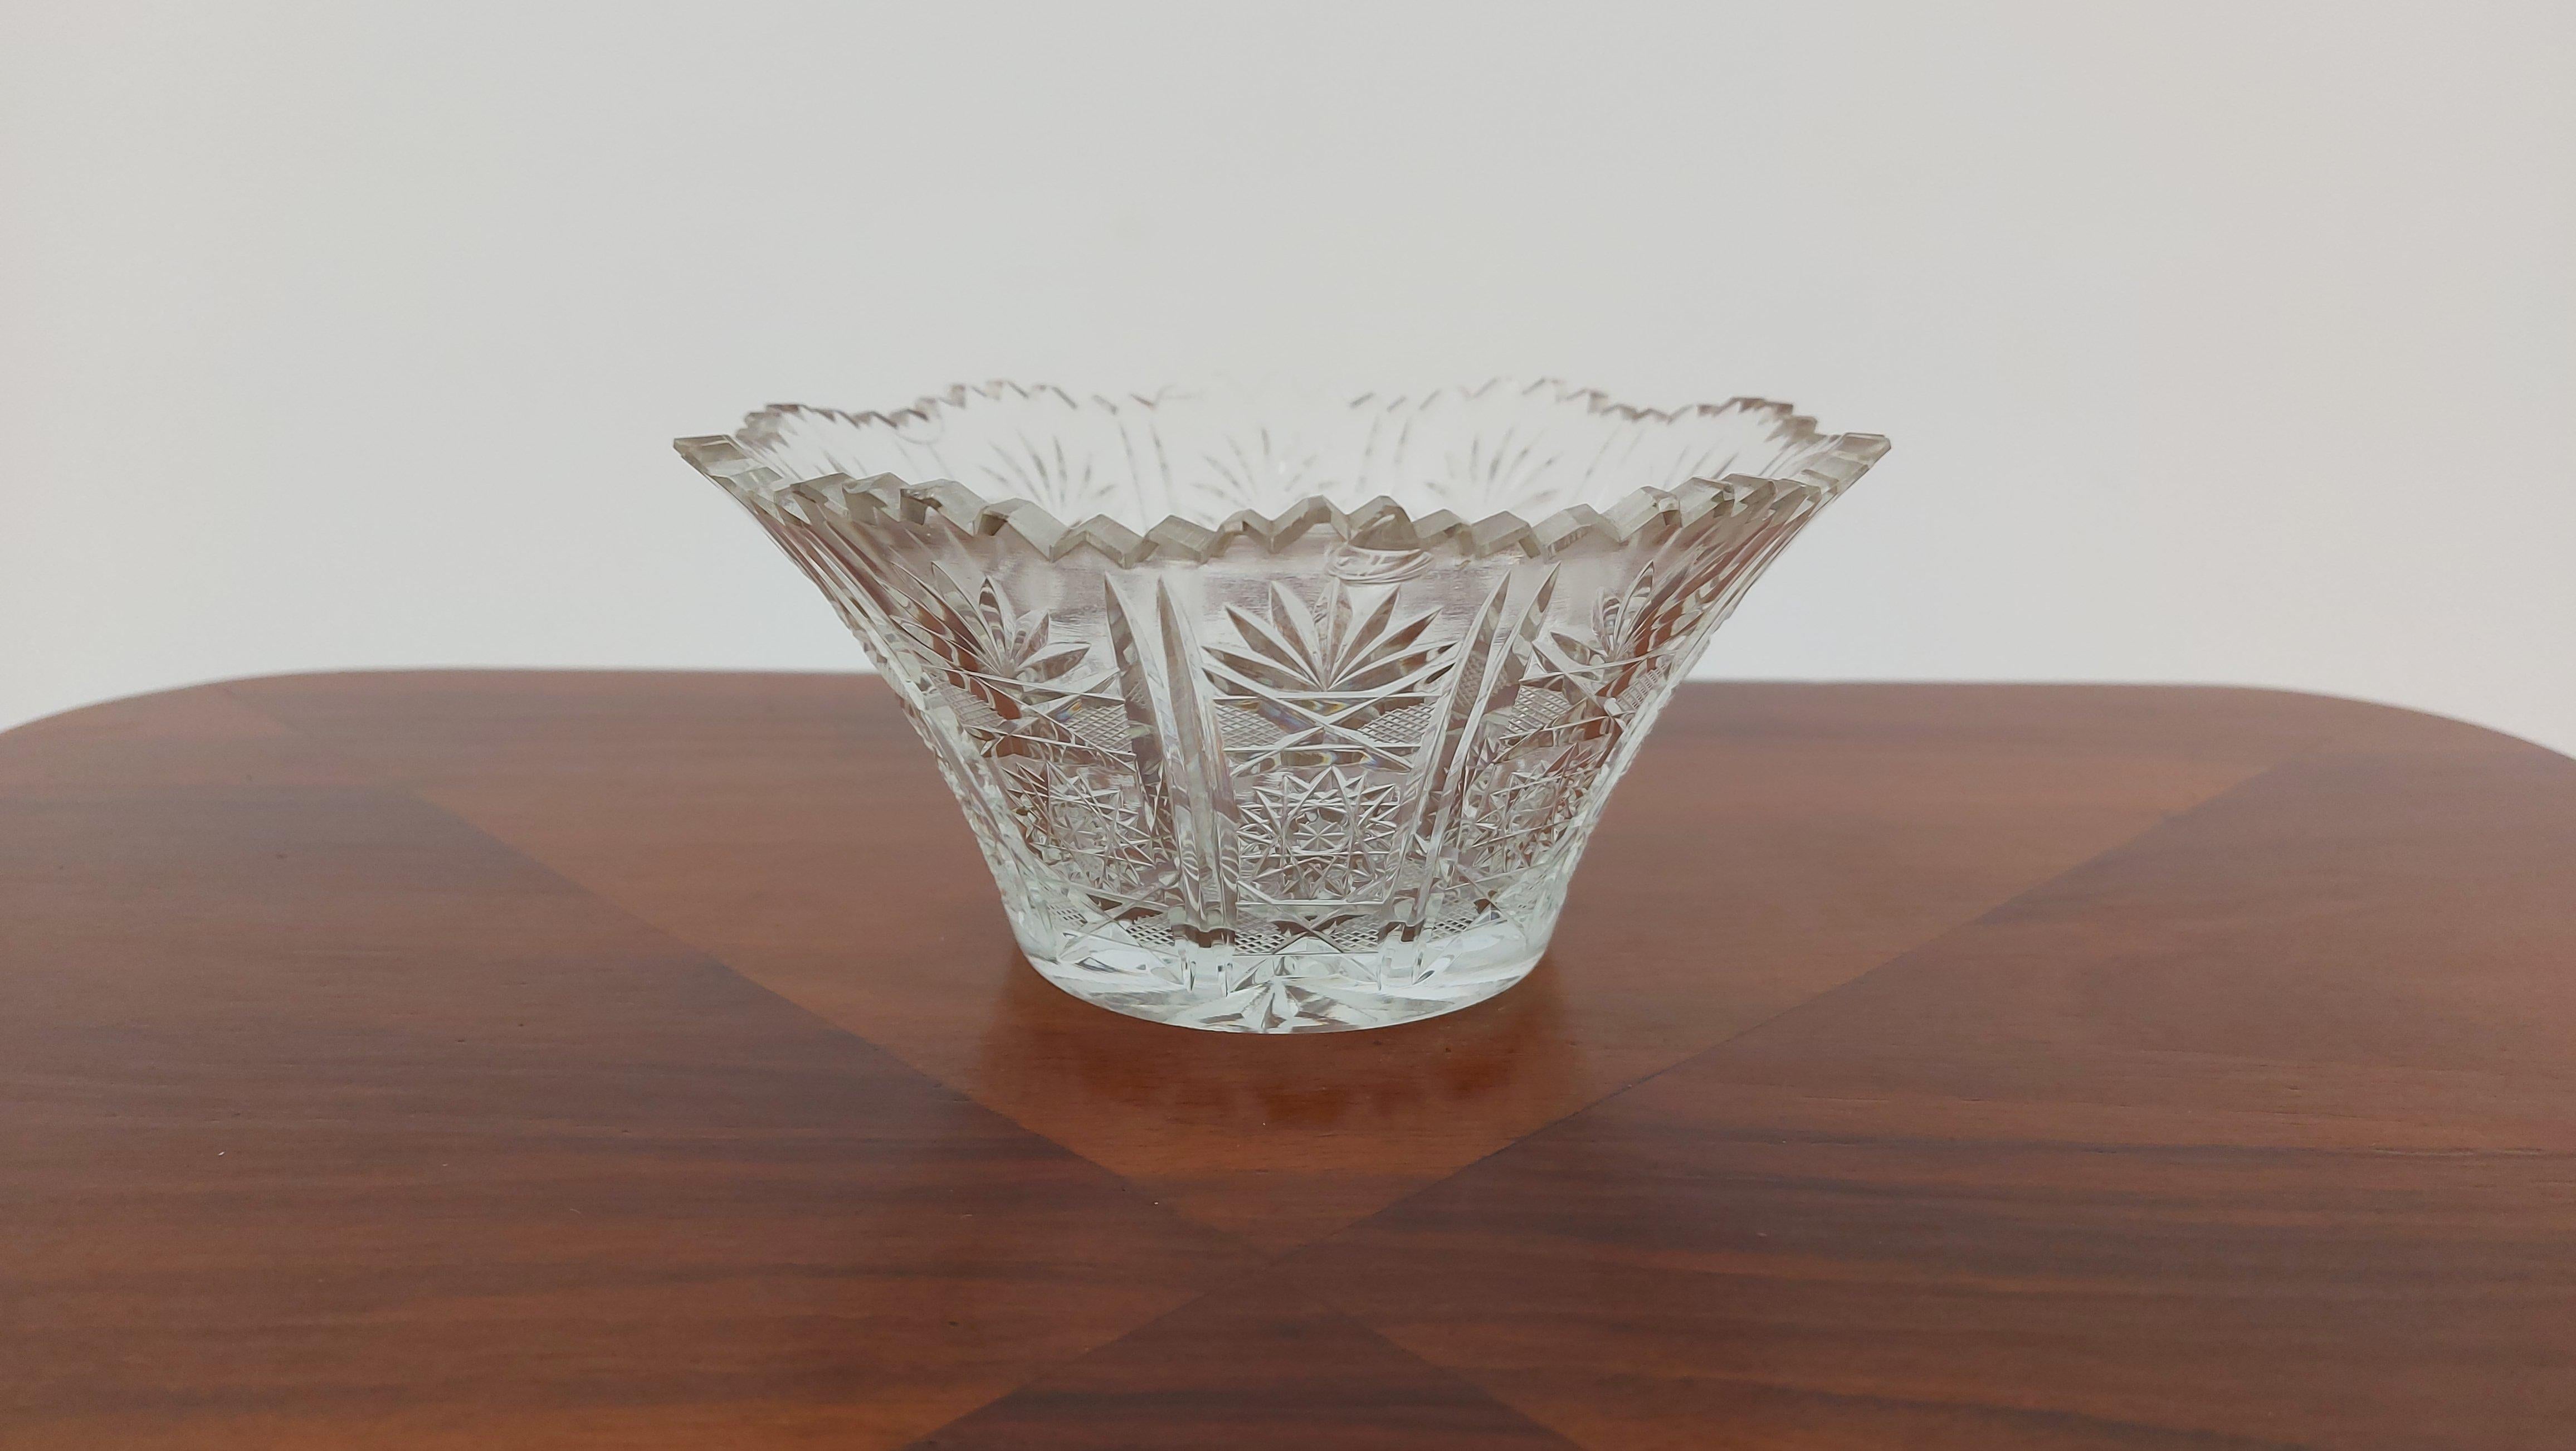 Crystal bowl for fruit or sweets.

Made in Poland in the 1950s / 1960s.

Very good condition.

Dimensions: height 8 cm / diameter 17.5 cm.